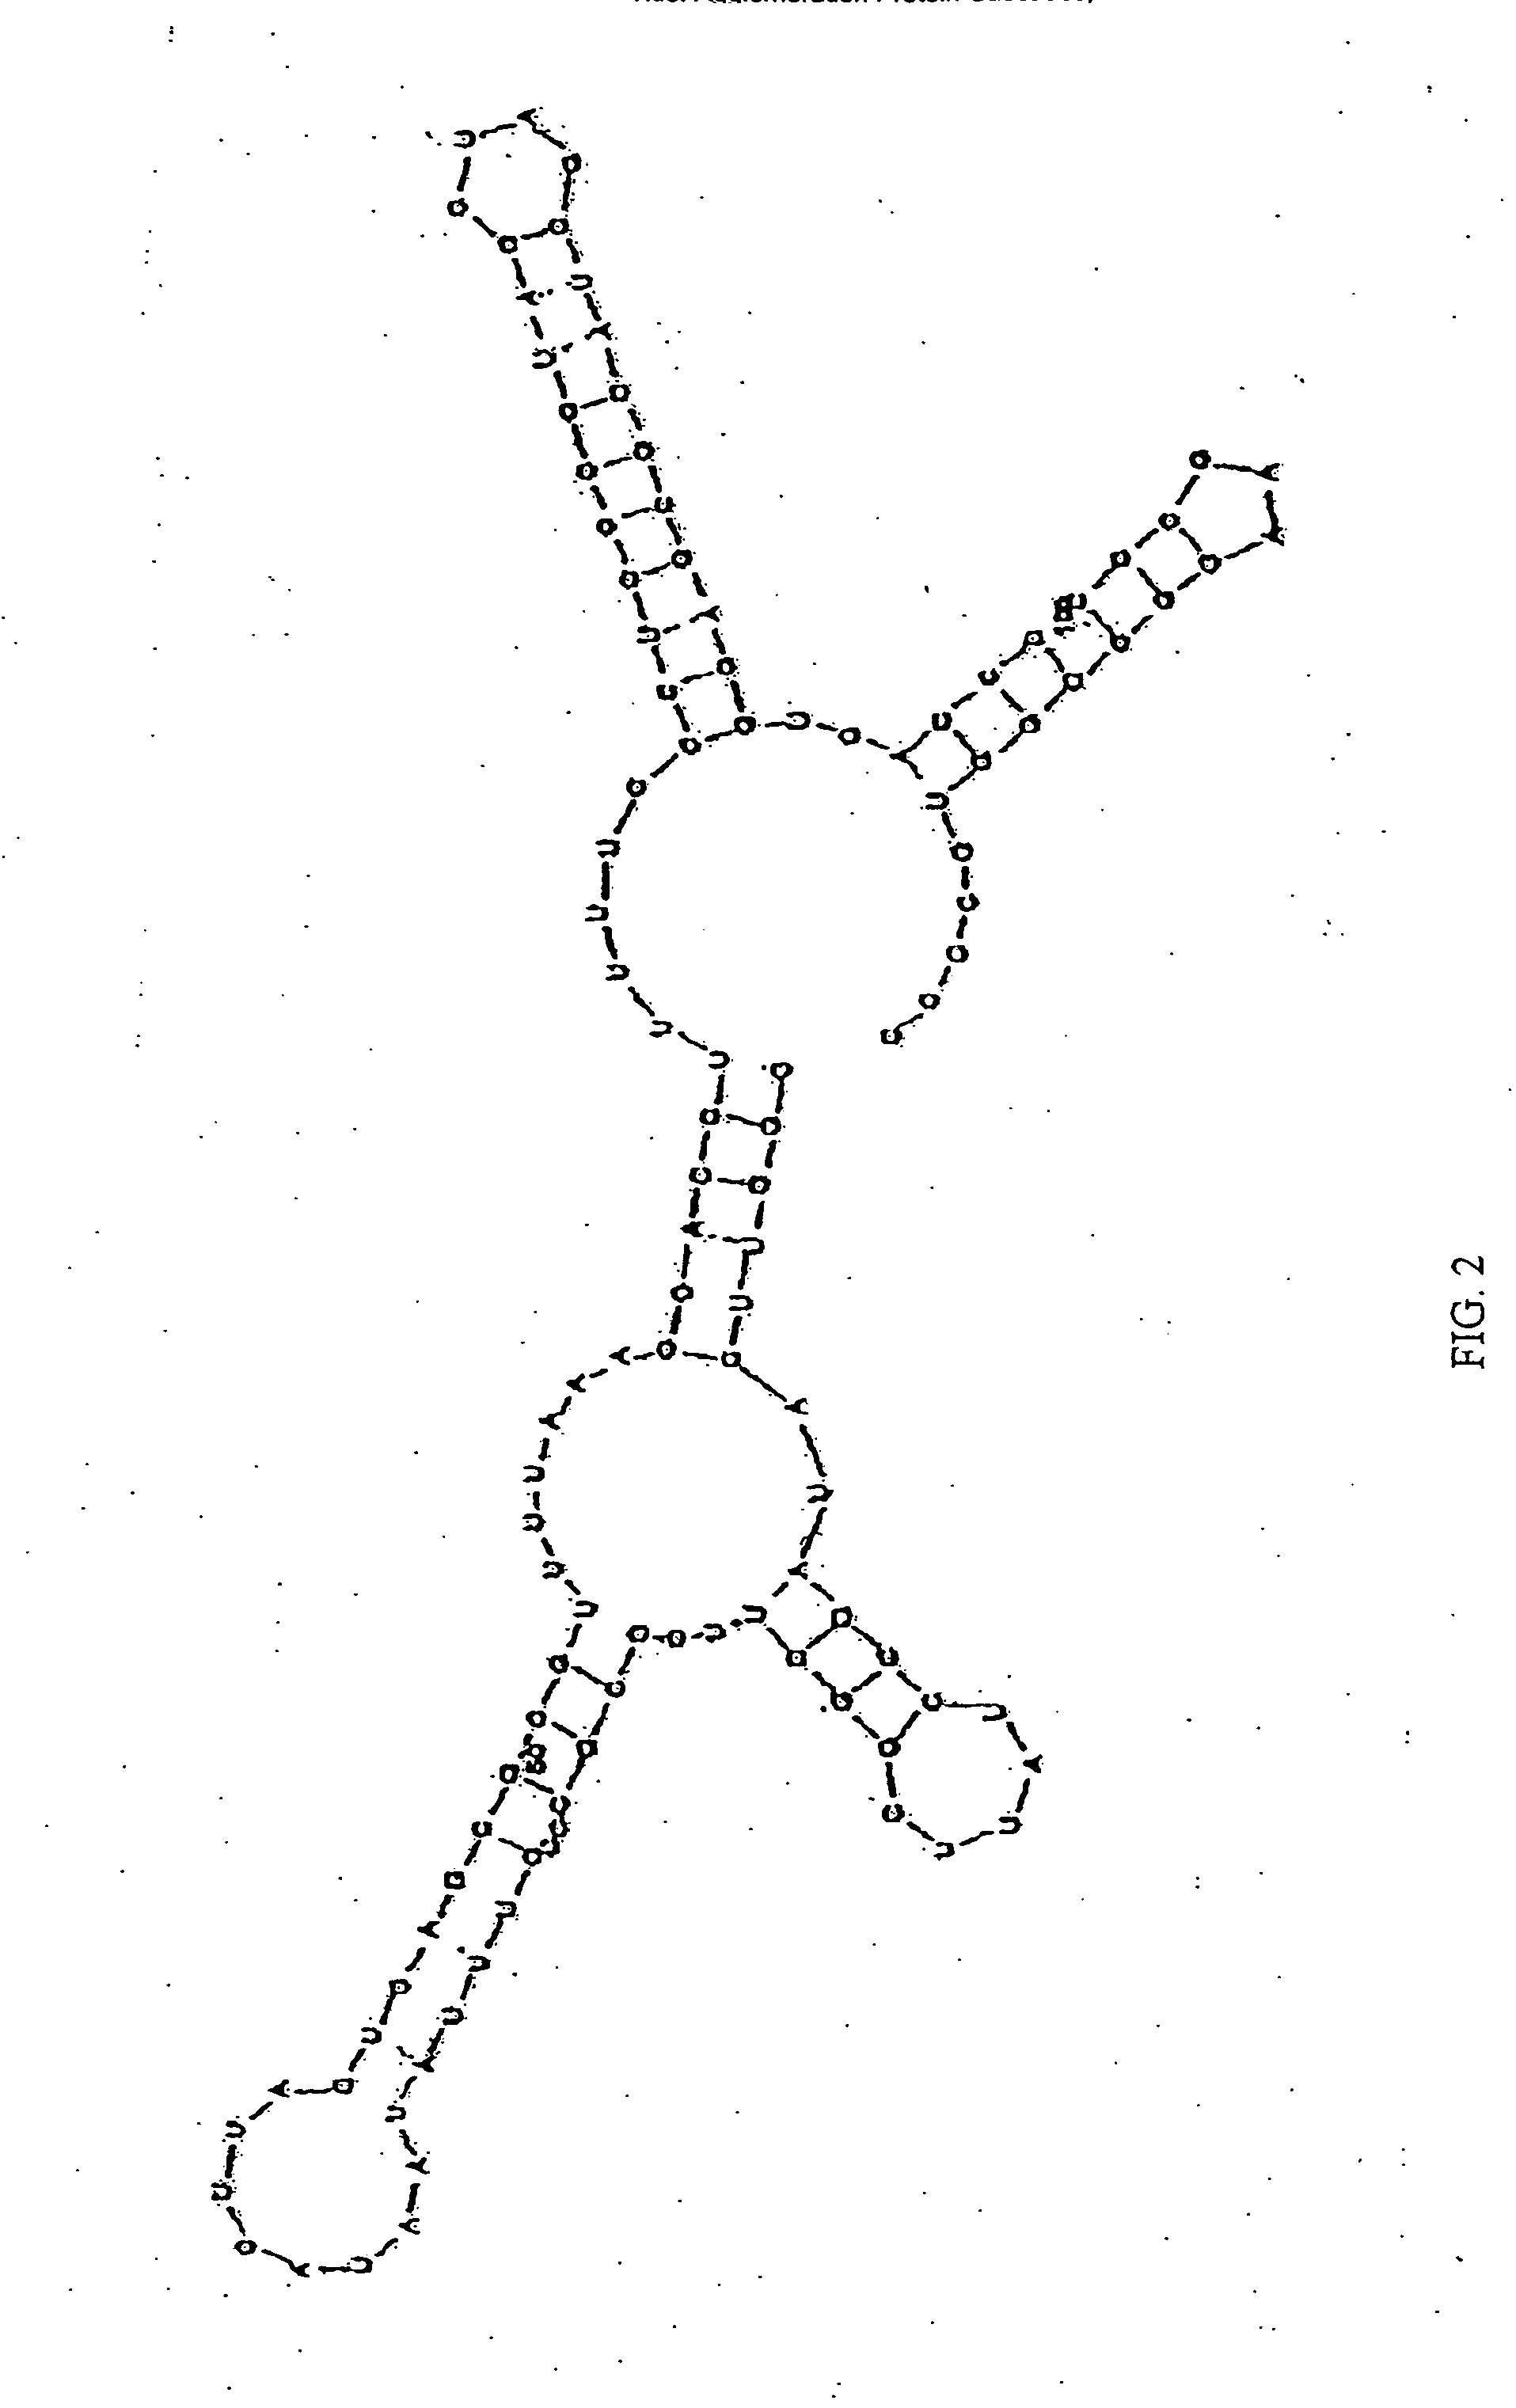 Agglomeration protein cascades, compositions and methods regarding the same